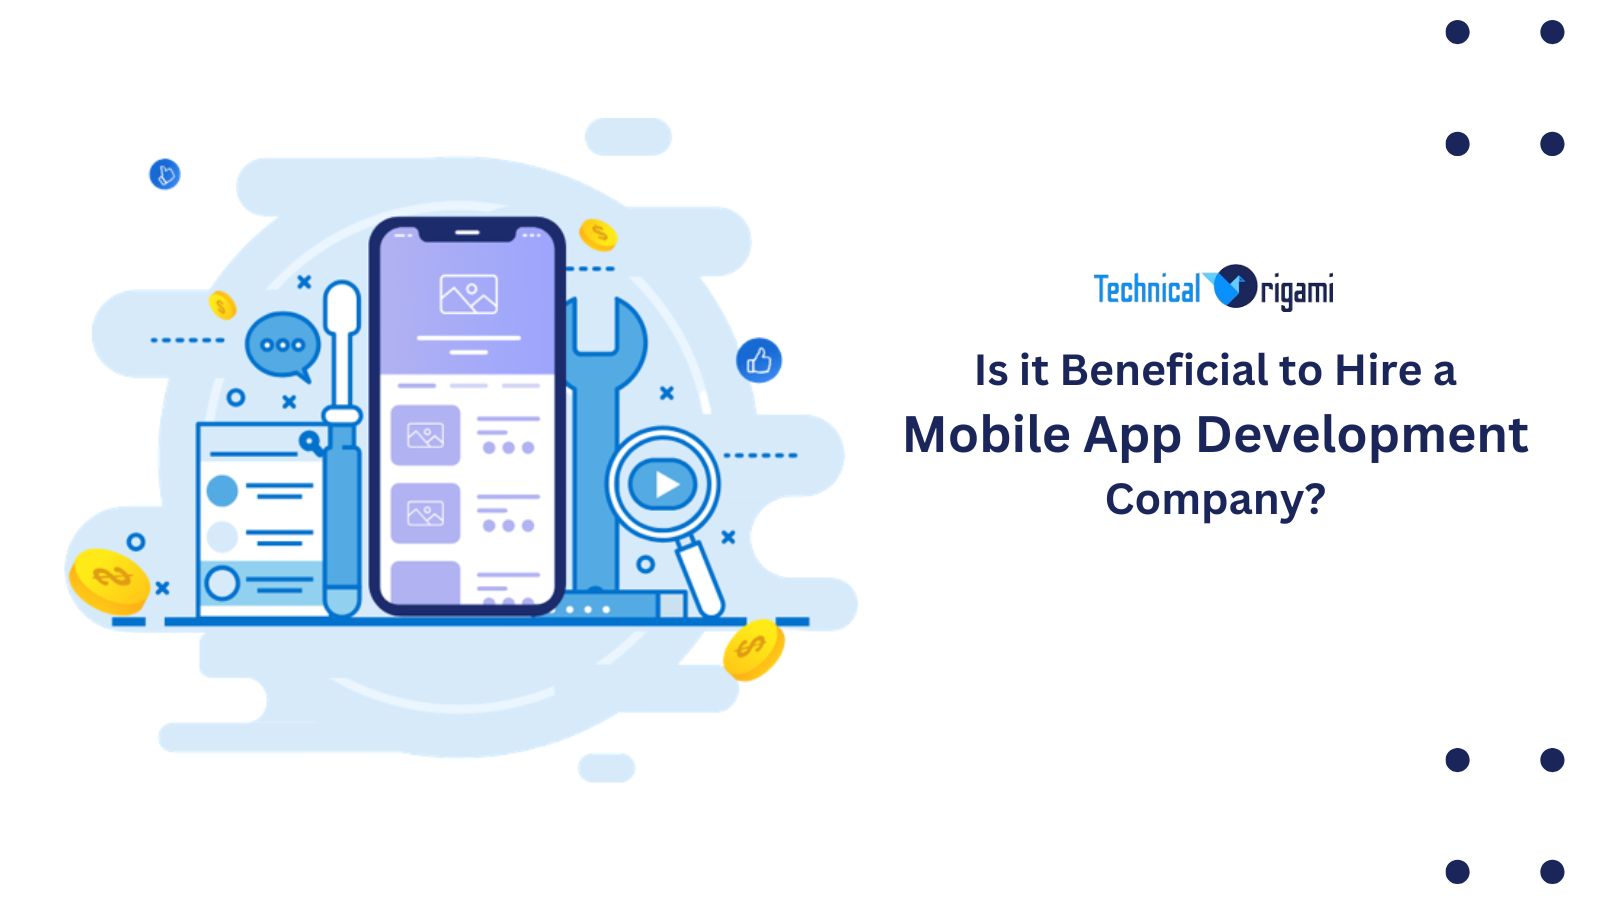 Is it Beneficial to Hire a Mobile App Development Company